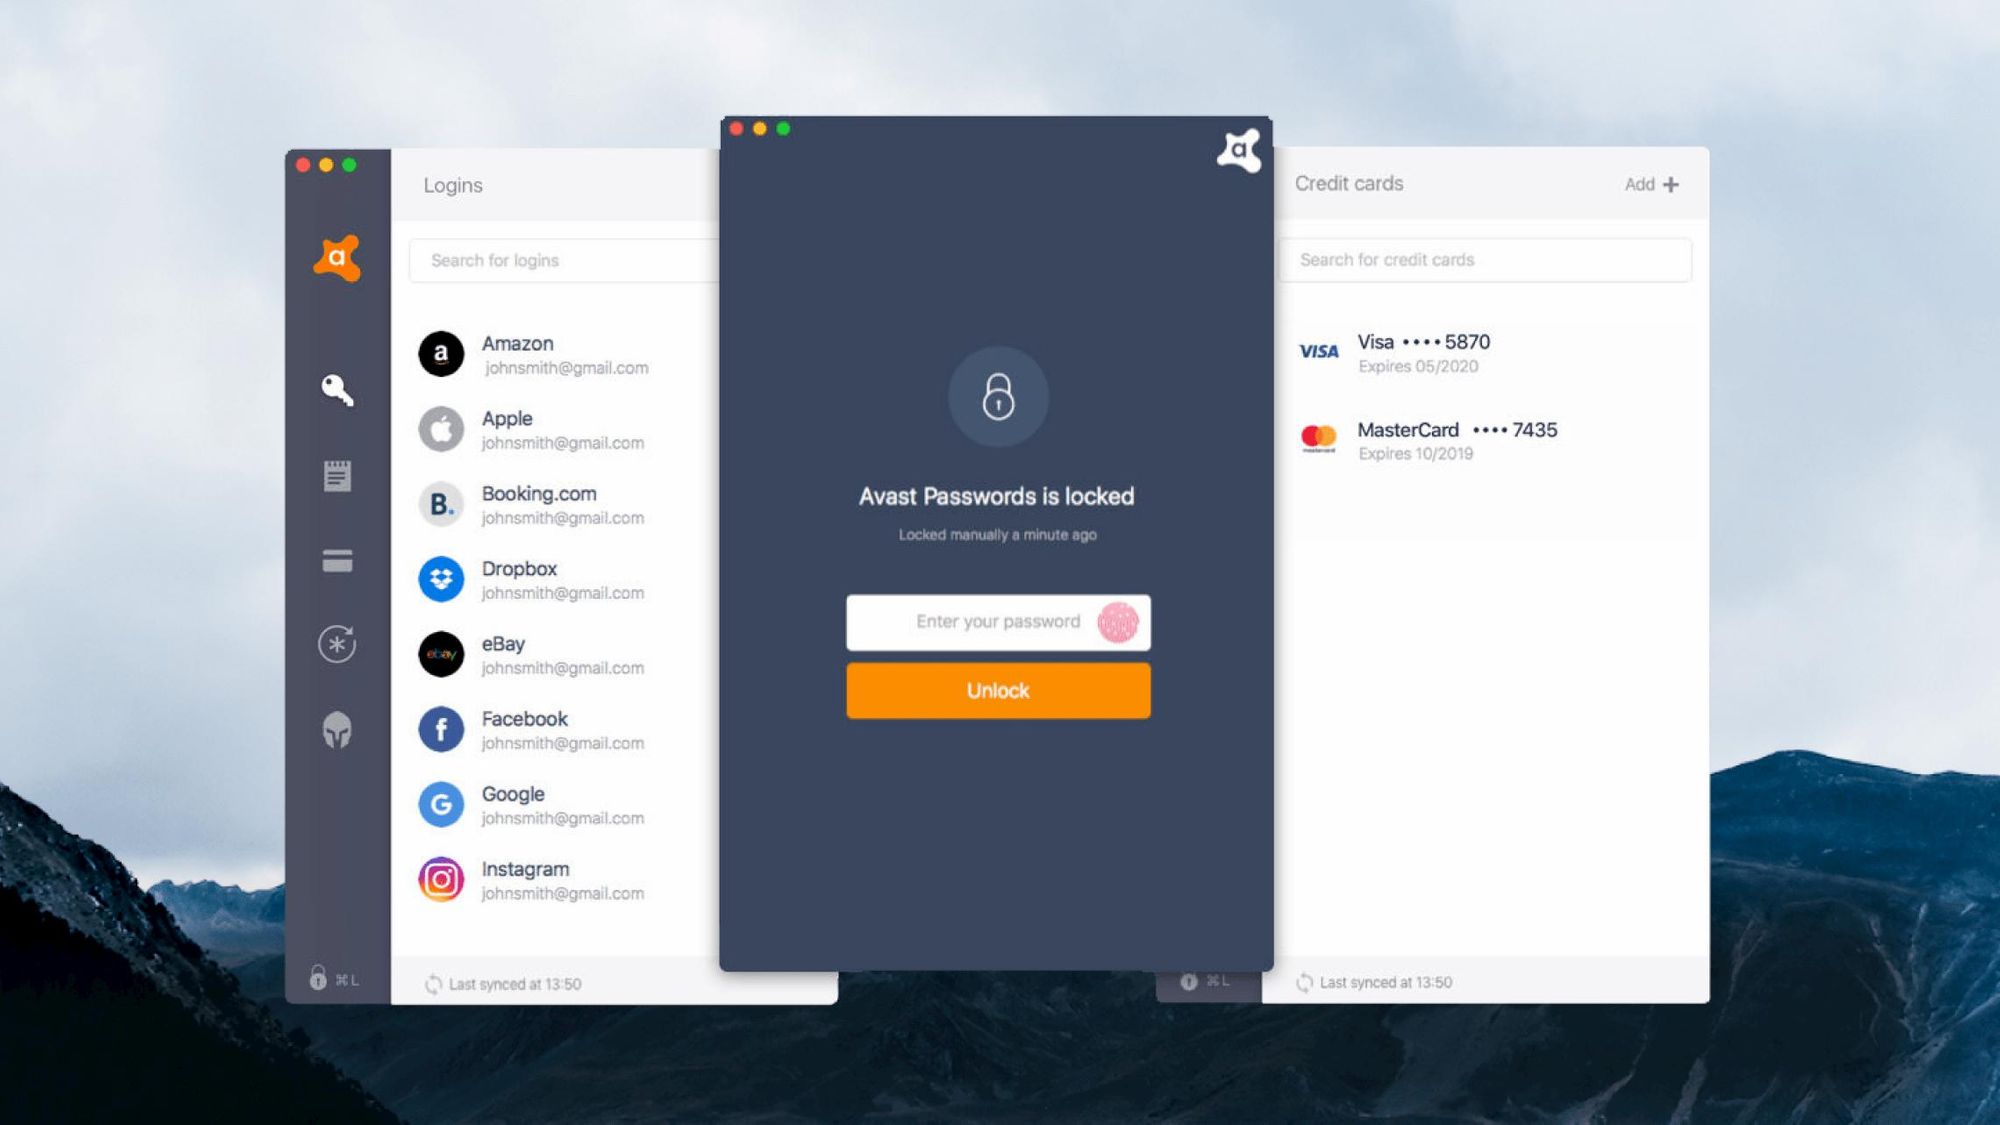 avast password manager for mac